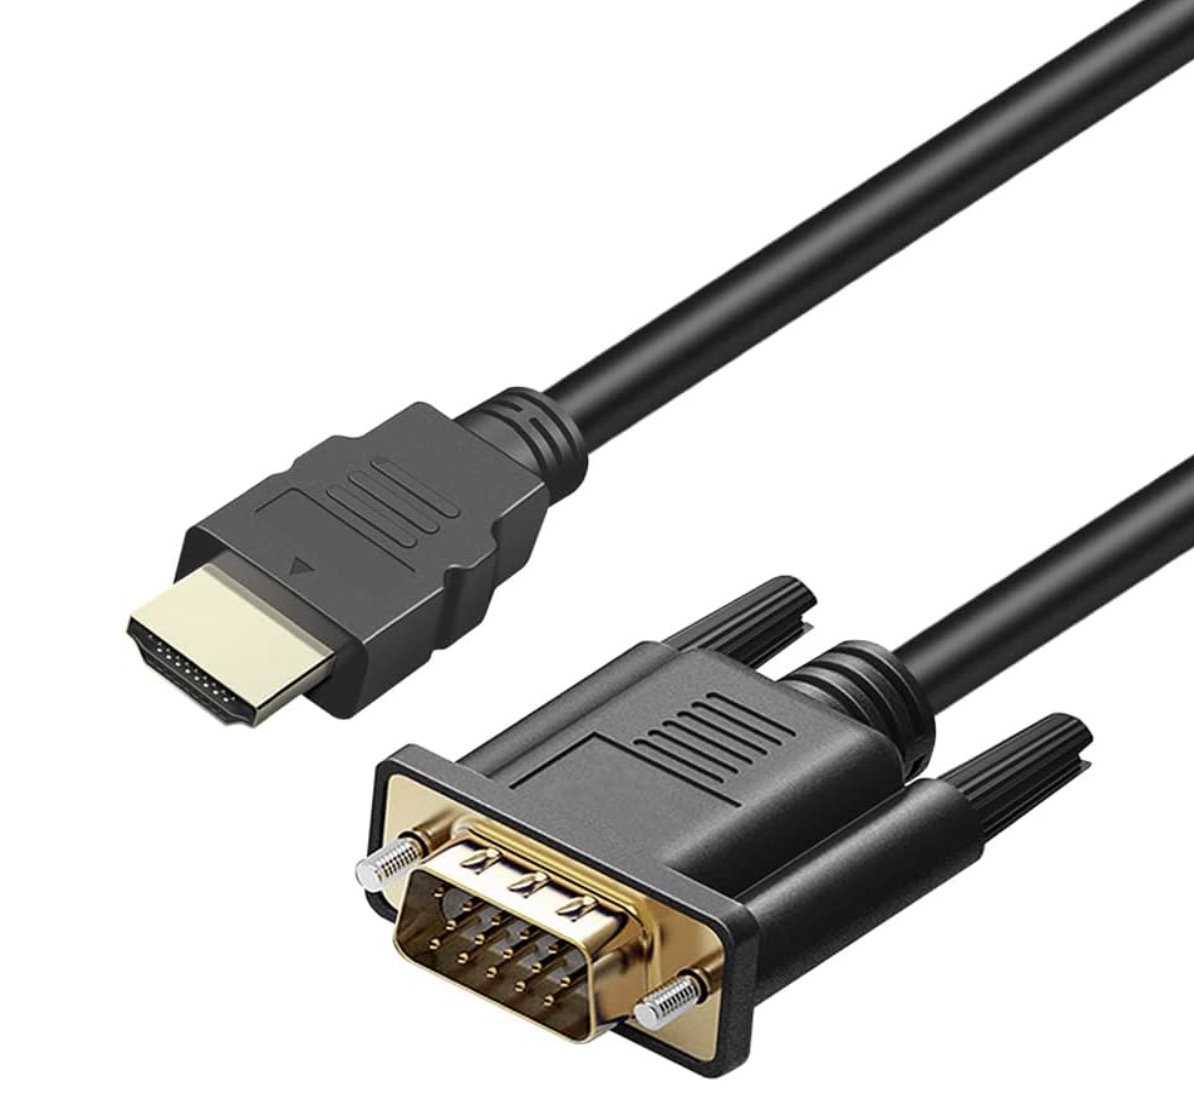 HDMI to VGA (Male to Male) Cable - 6 feet